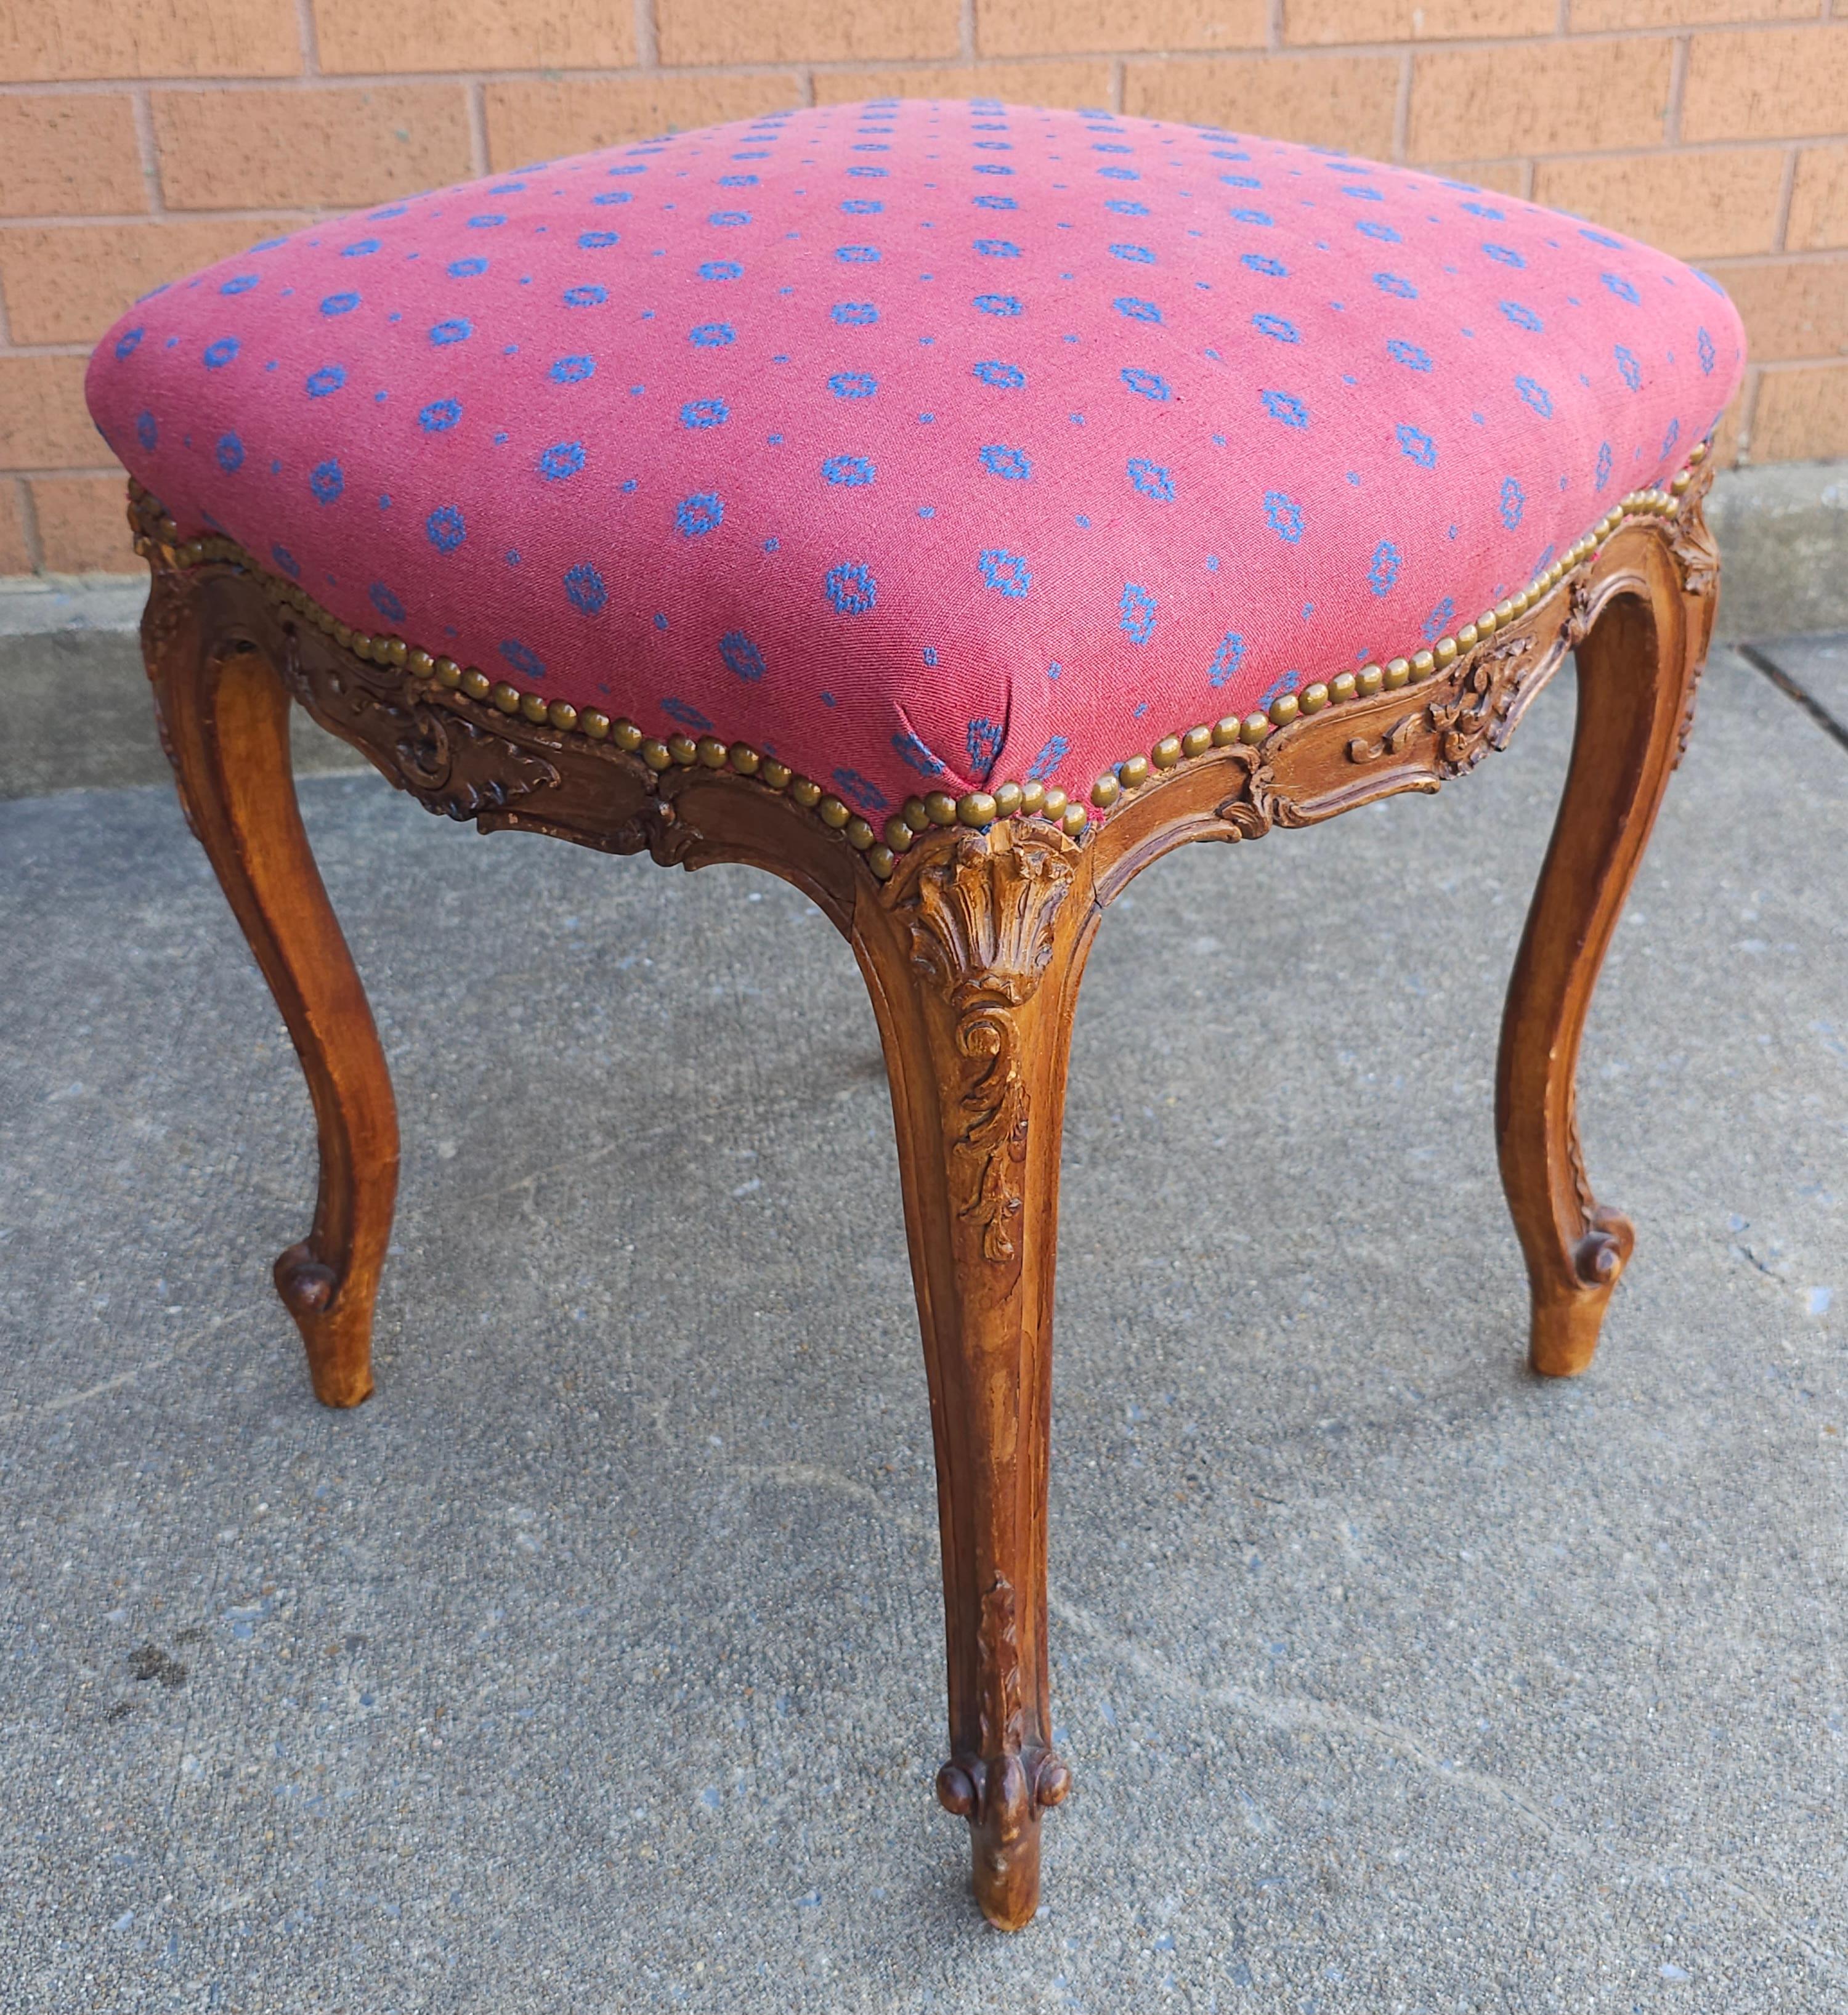 A gorgeous Early 20th C. Louis XV Carved Fruitwood Brass Nail Studded And Upholstered Bench.
Newer upholstery in great vintage condition.
Measures 18